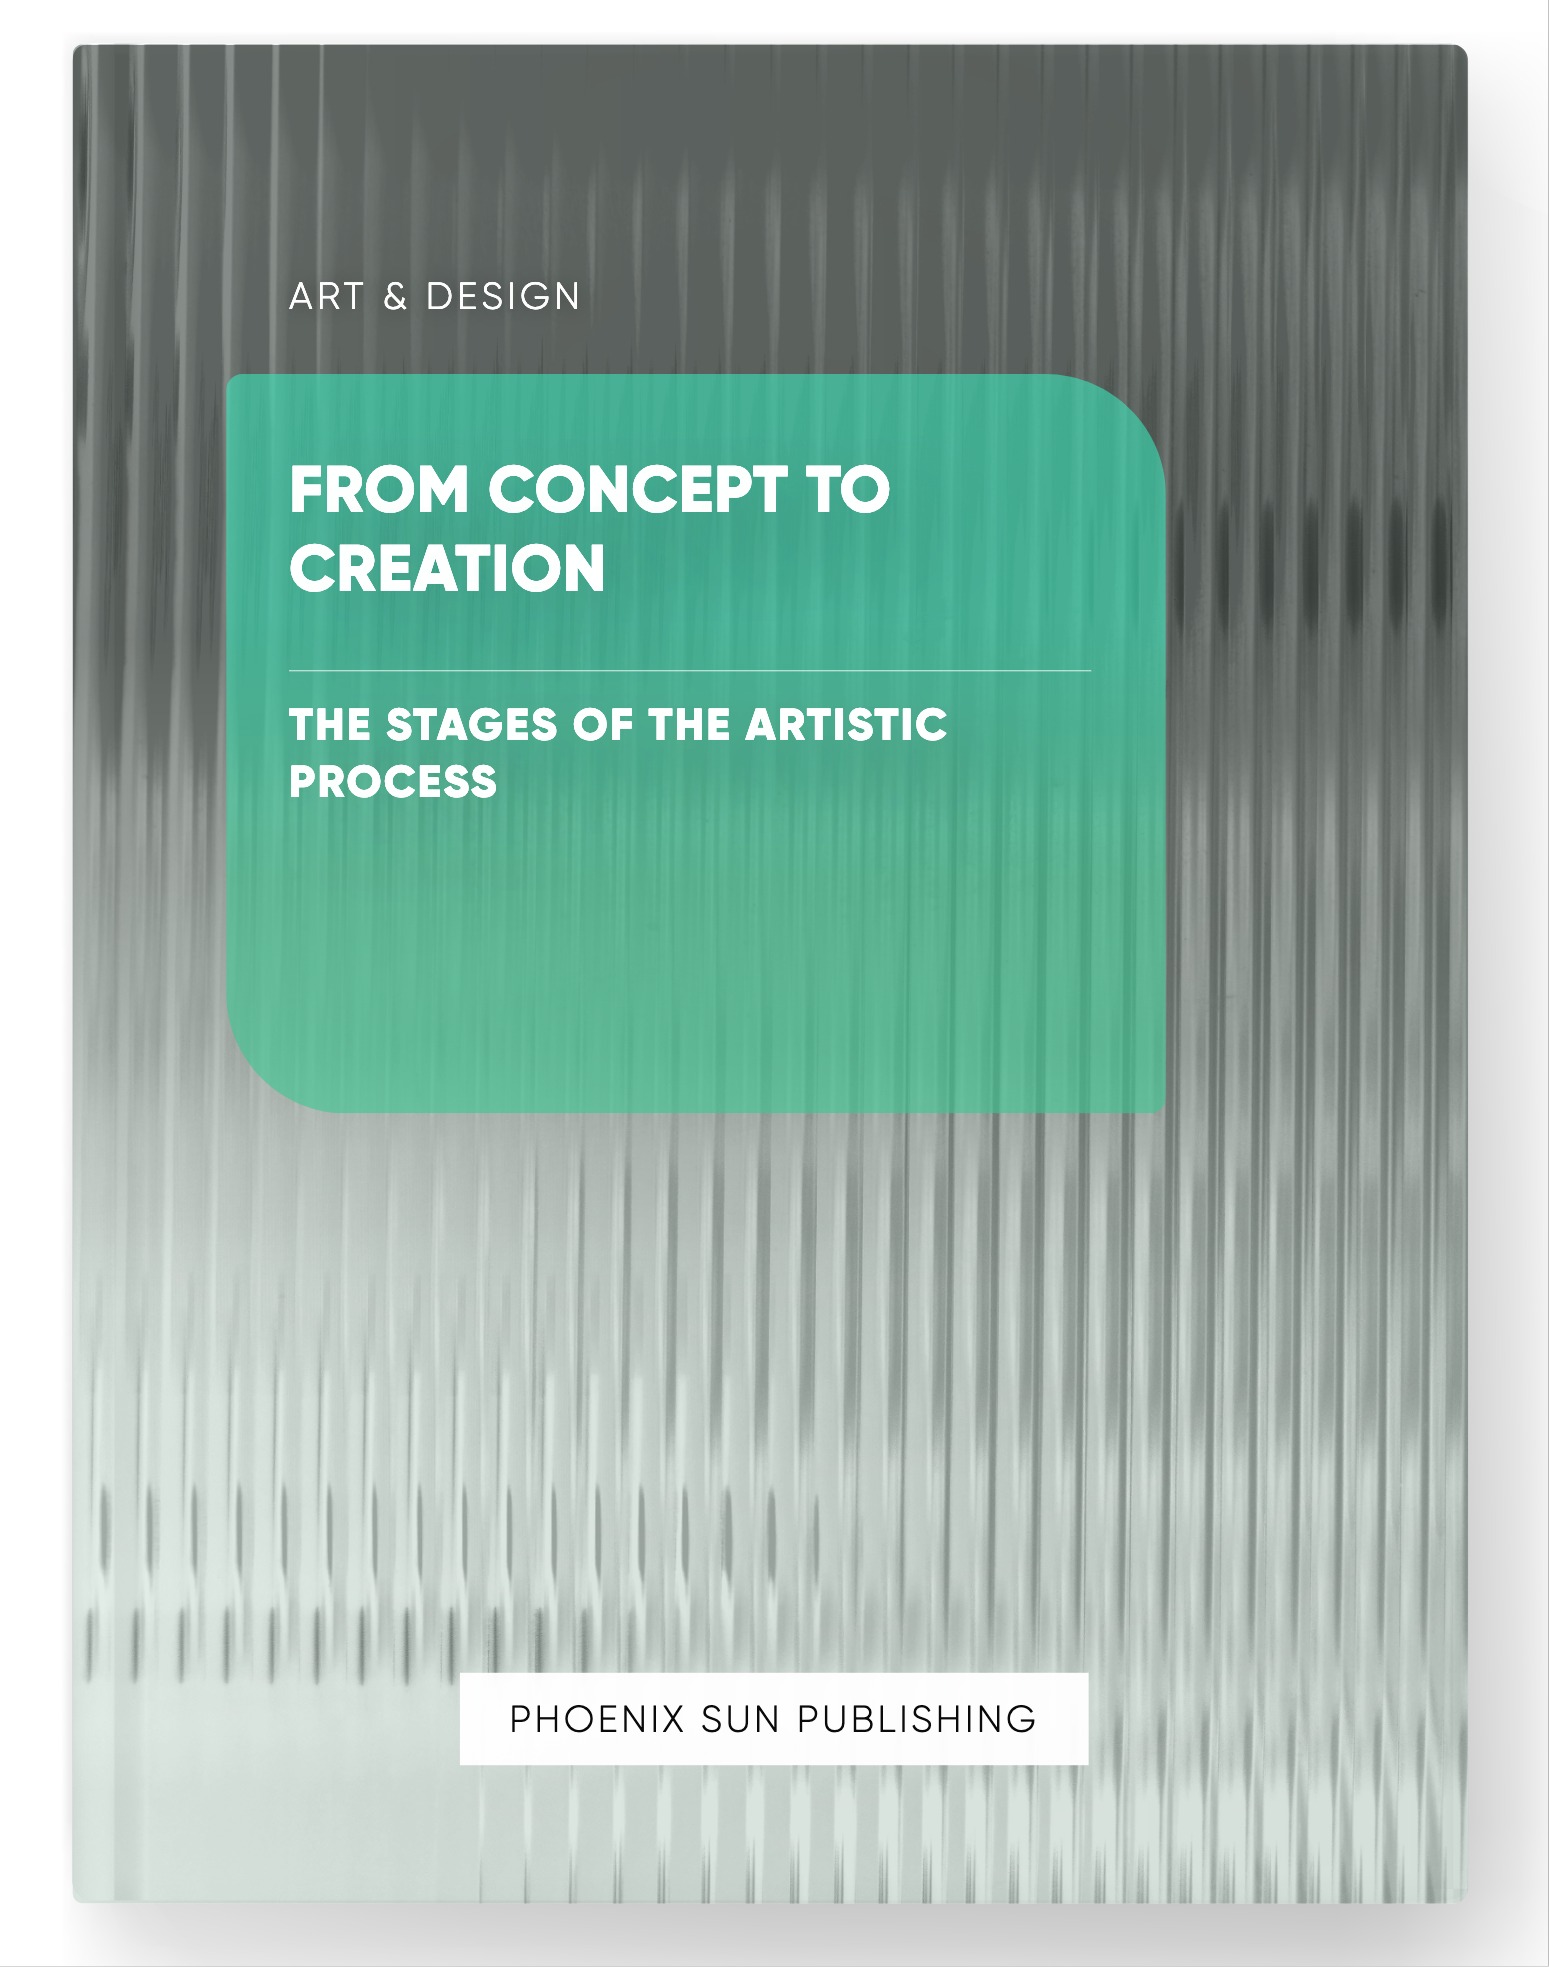 From Concept to Creation – The Stages of the Artistic Process